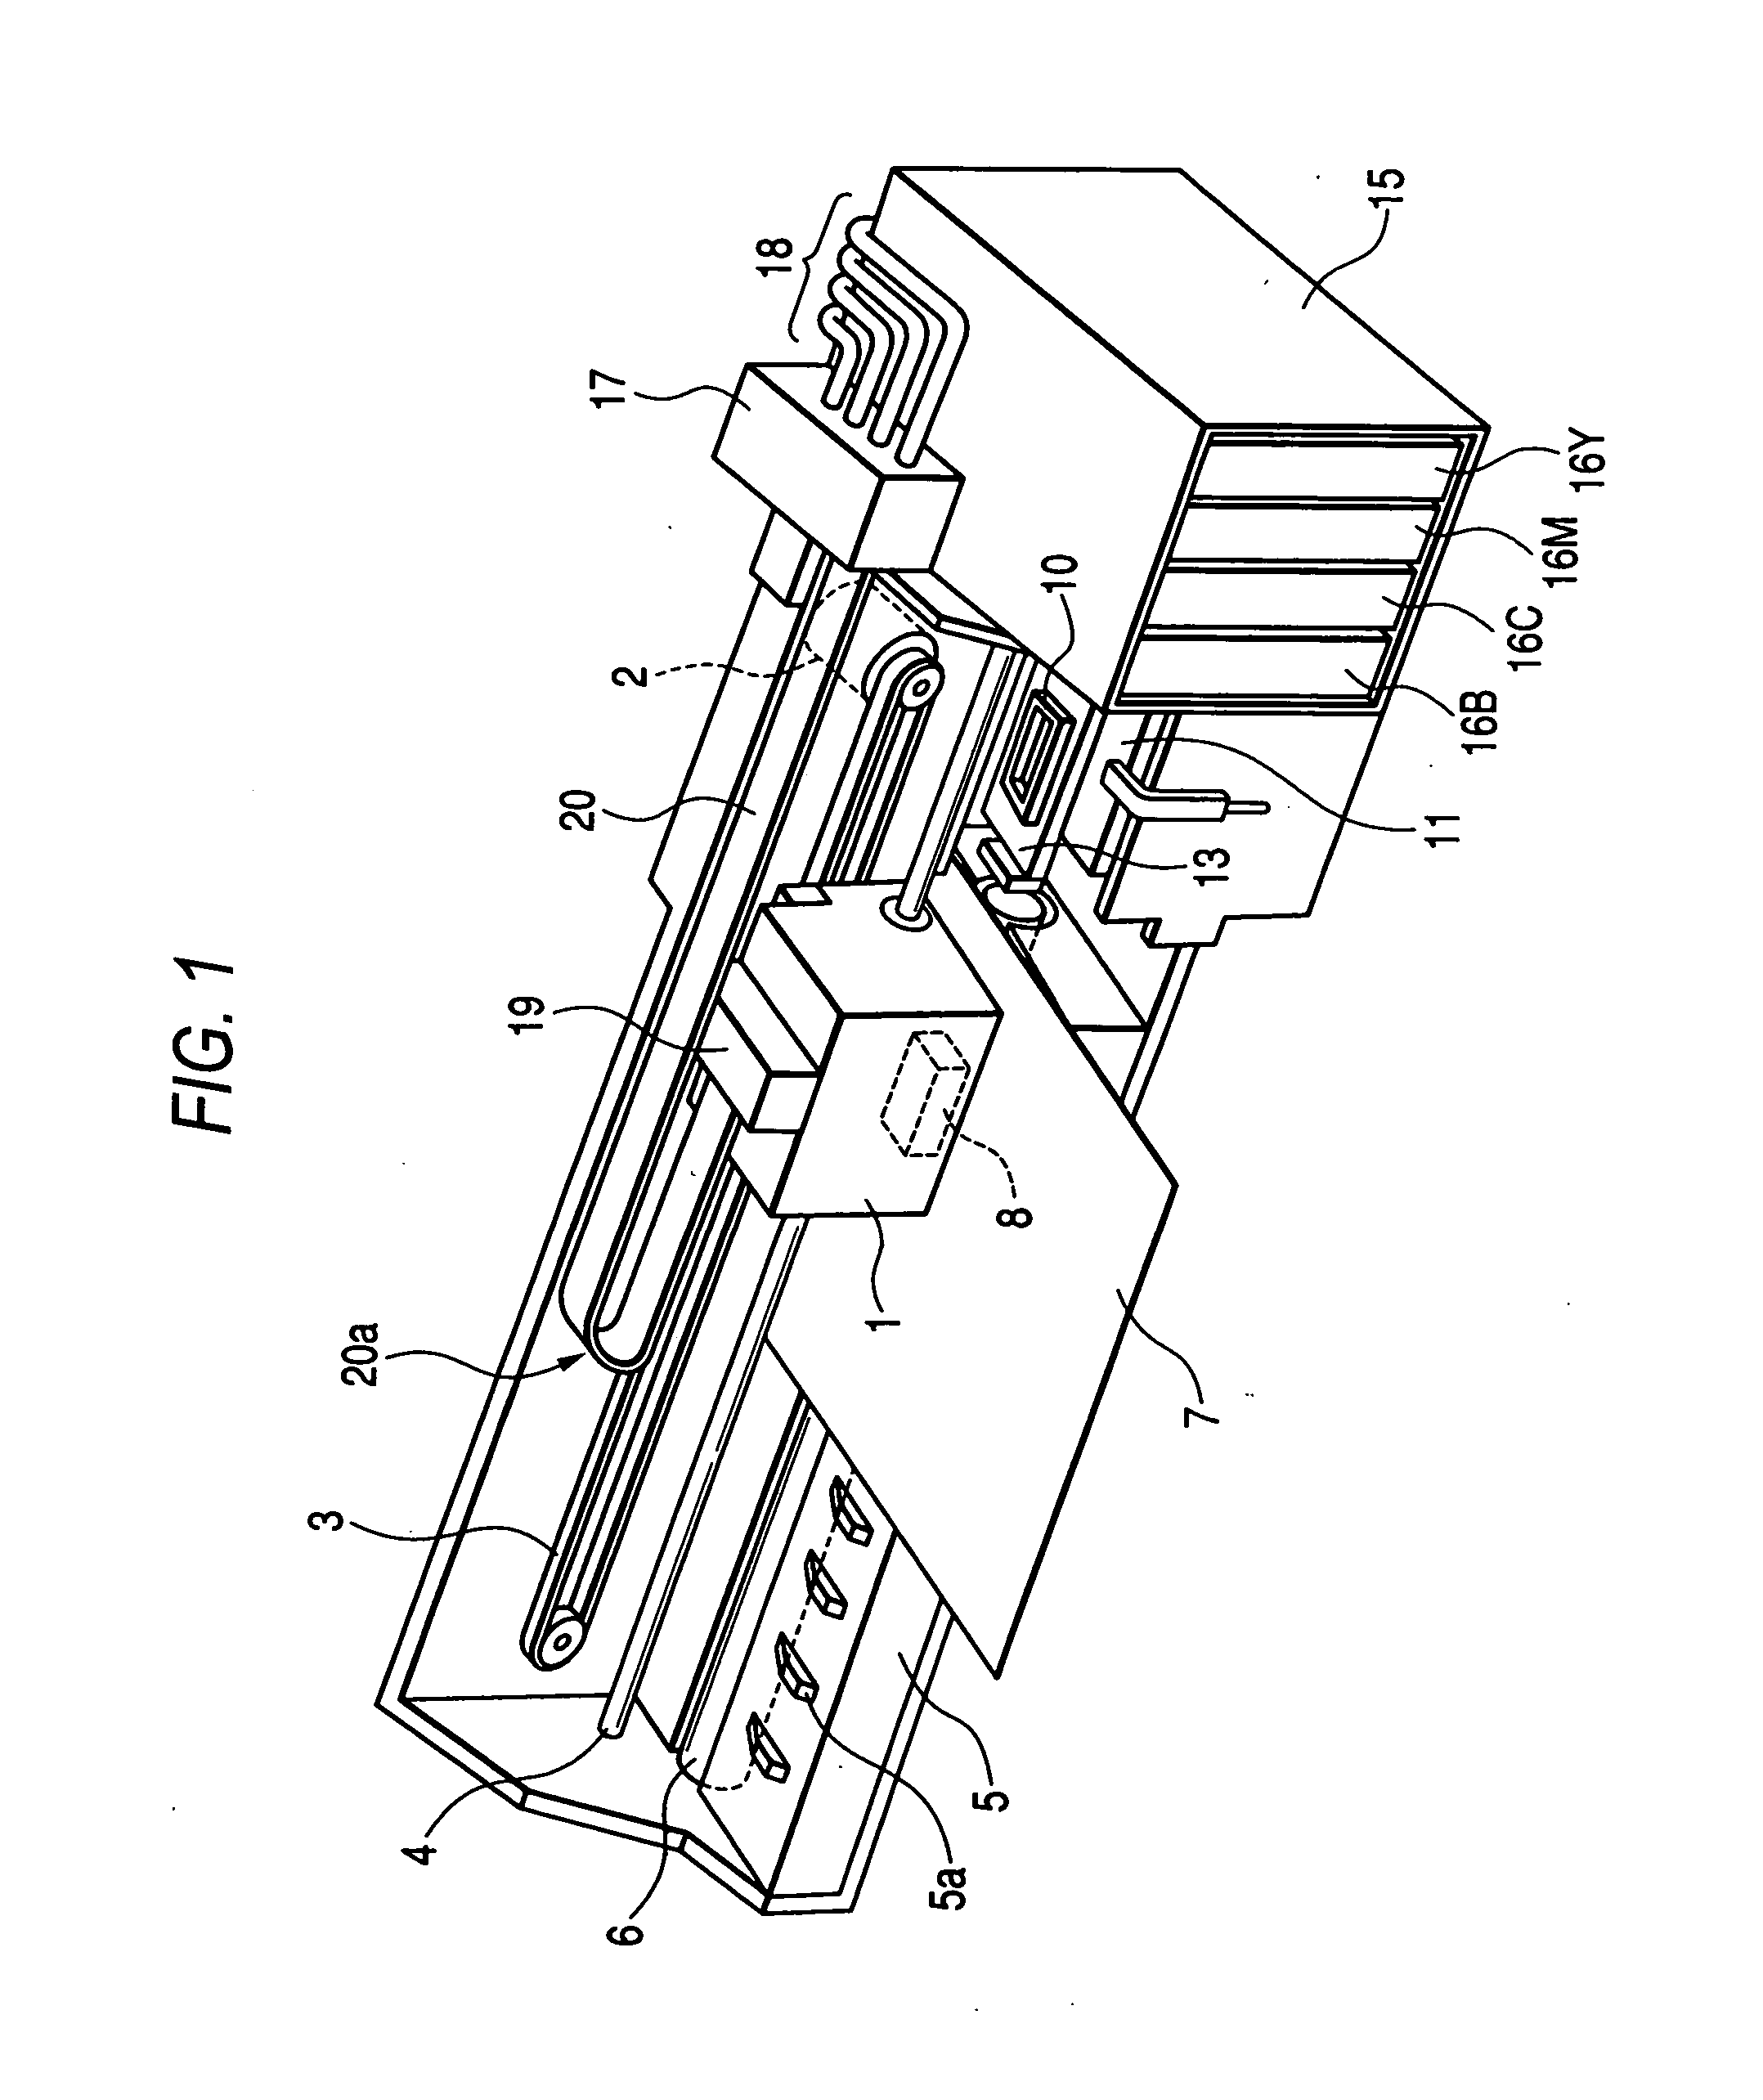 Liquid supplying member, method of manufacturing the same, and liquid ejection apparatus incorporating the same